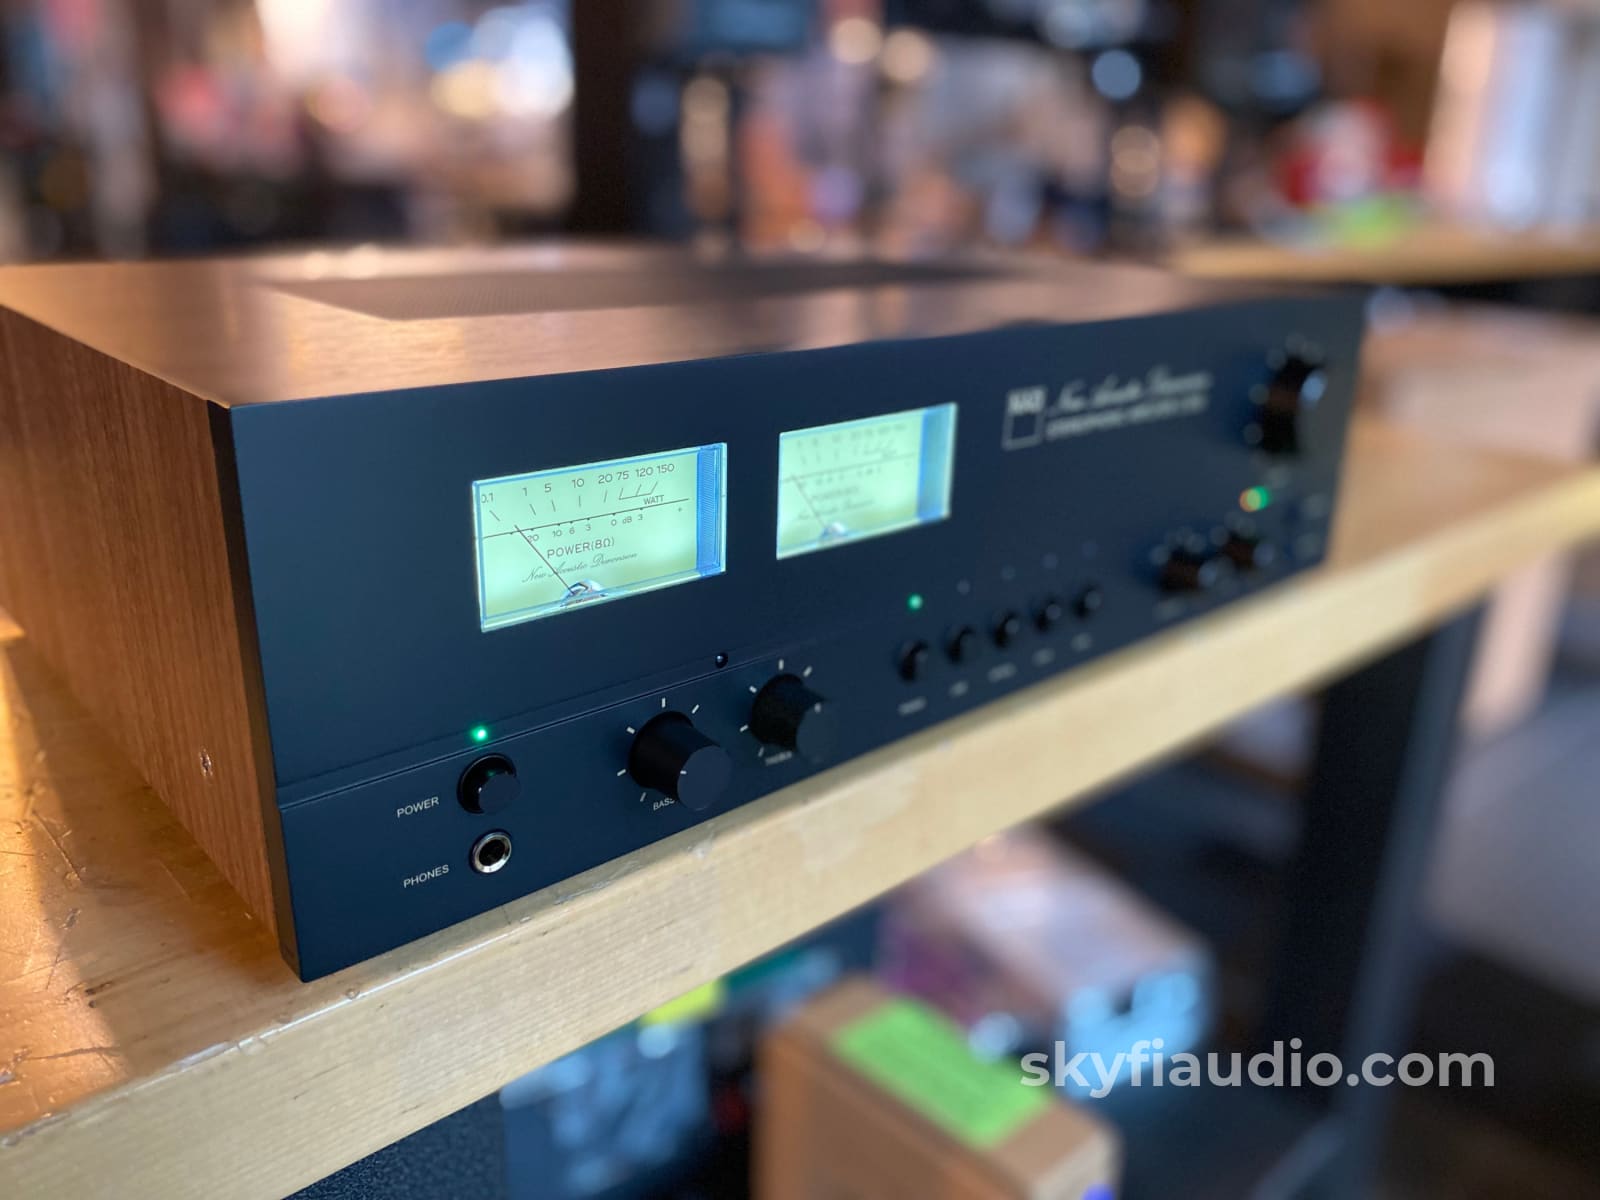 Nad C 3050 Integrated Amplifier Retro Look New In Open Box